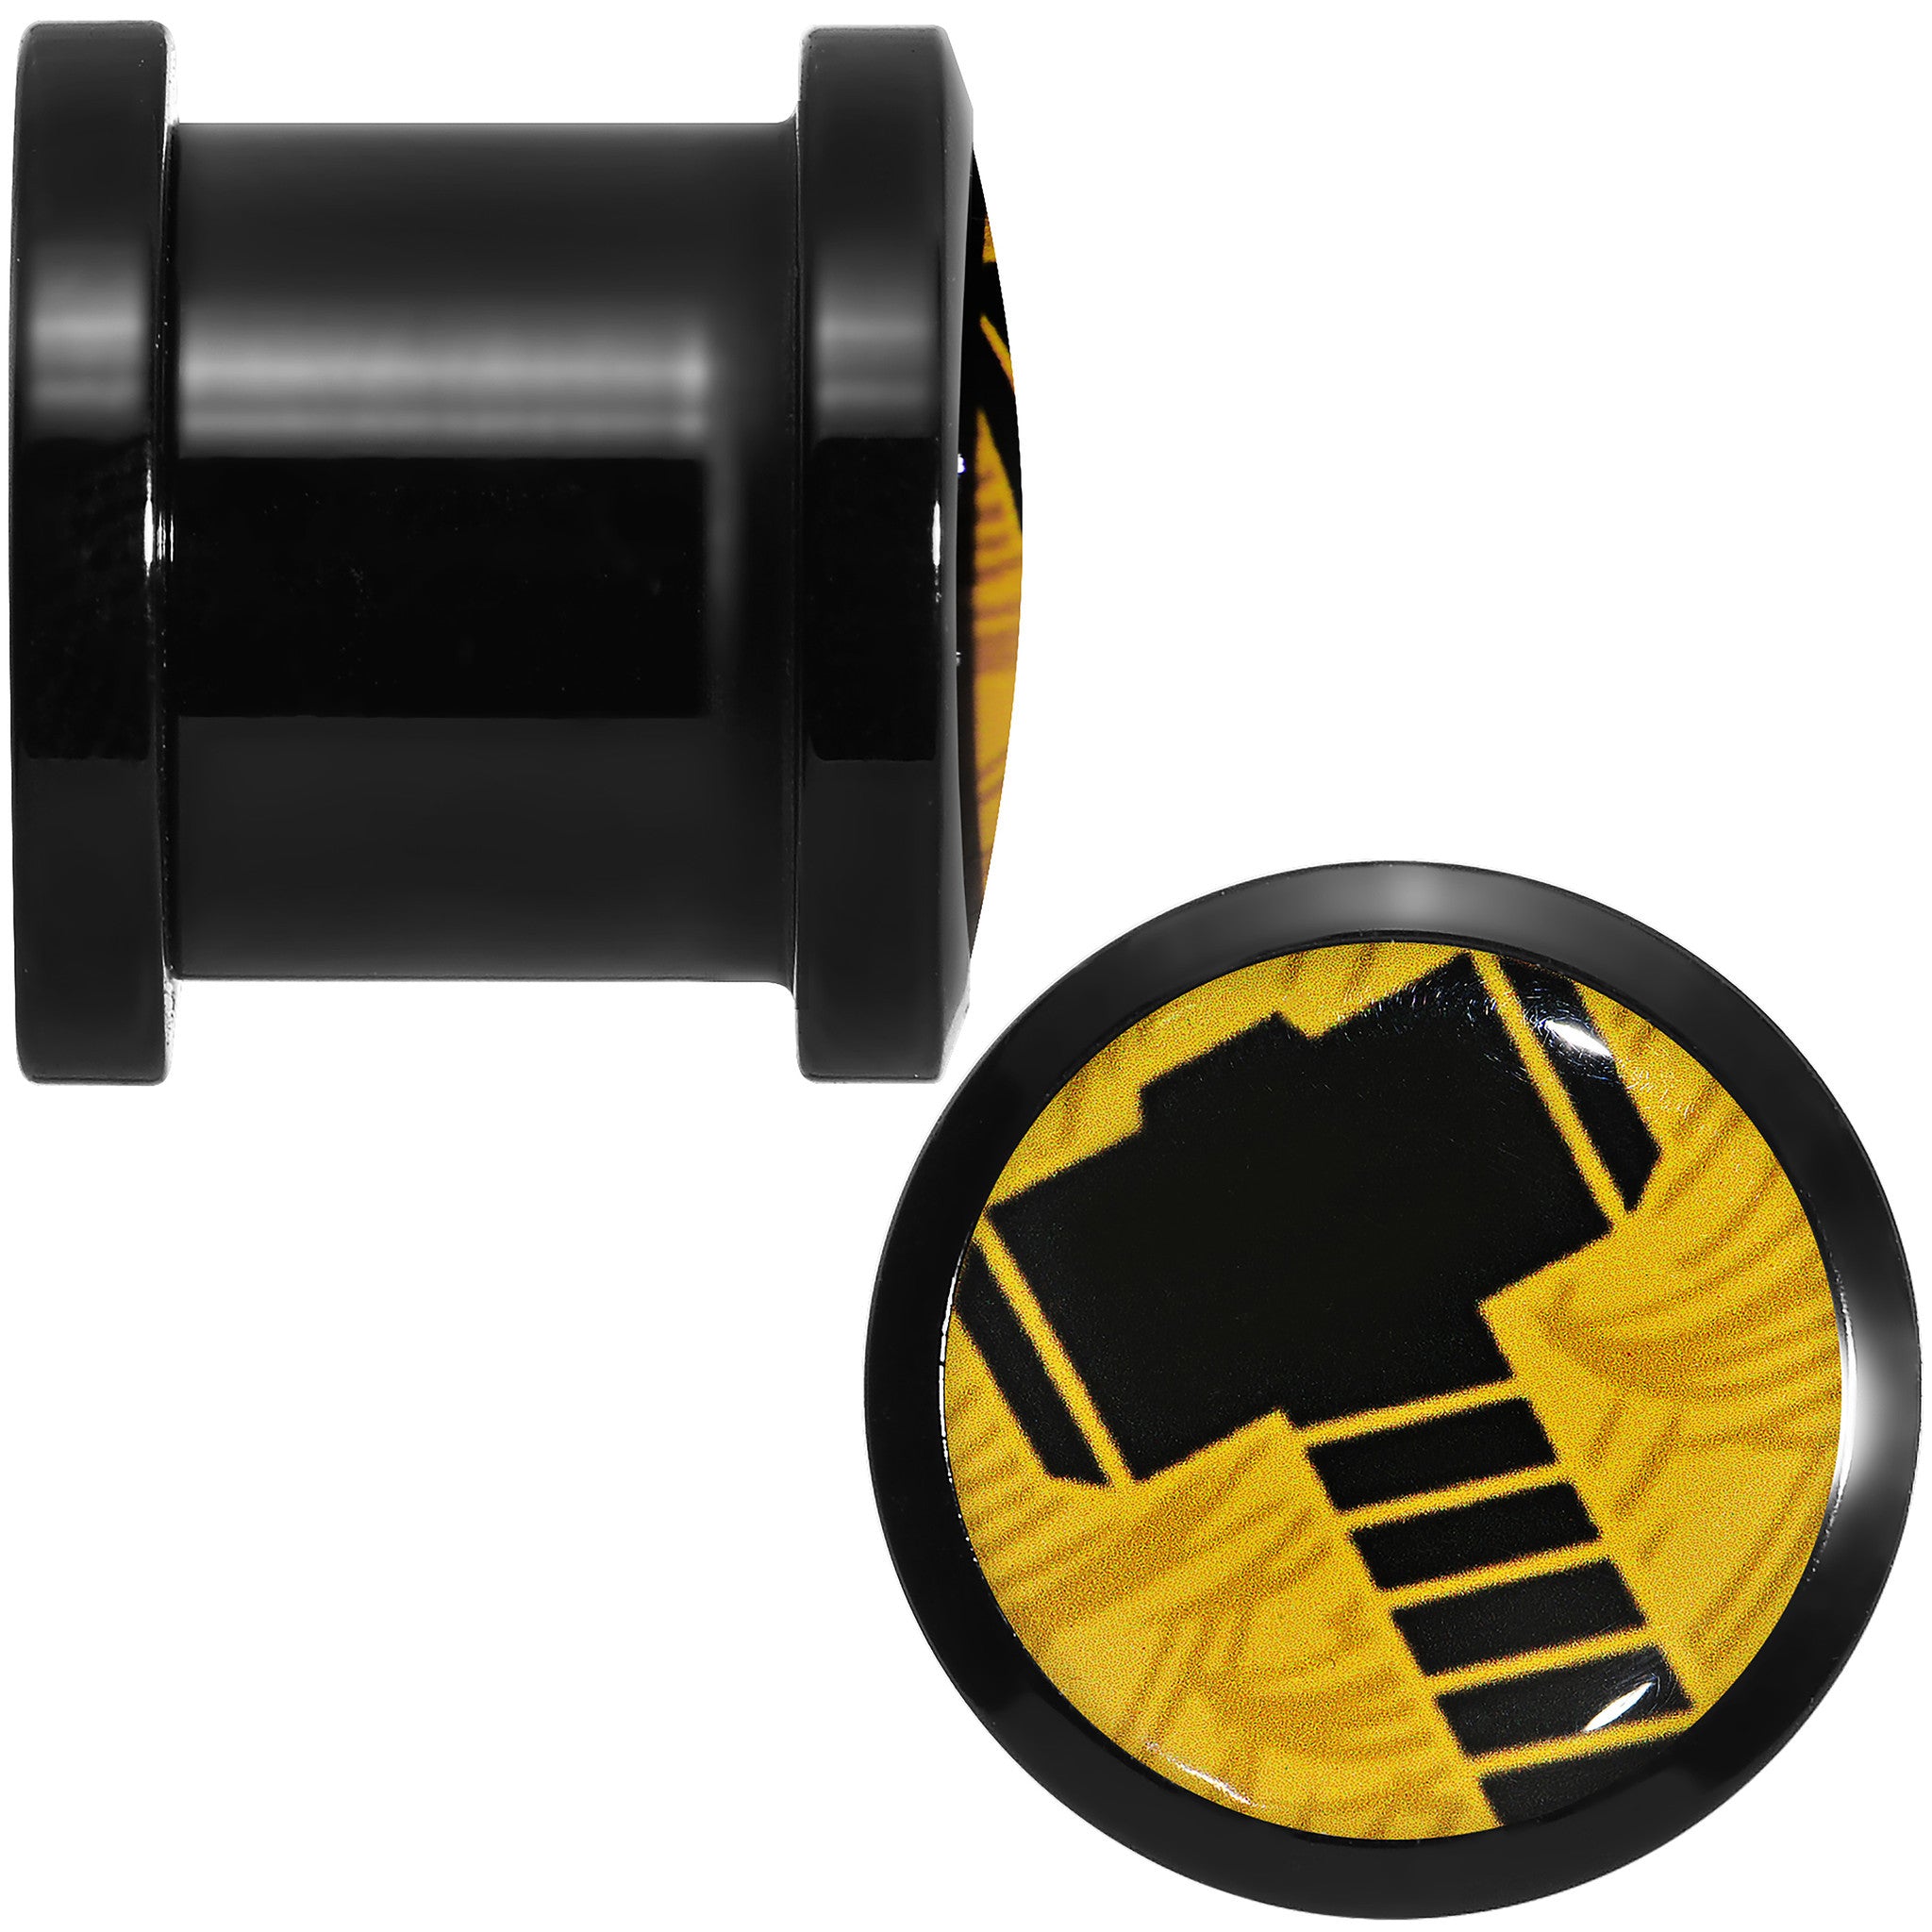 7/16 Licensed Hammer of Thor Acrylic Screw Fit Plugs Set